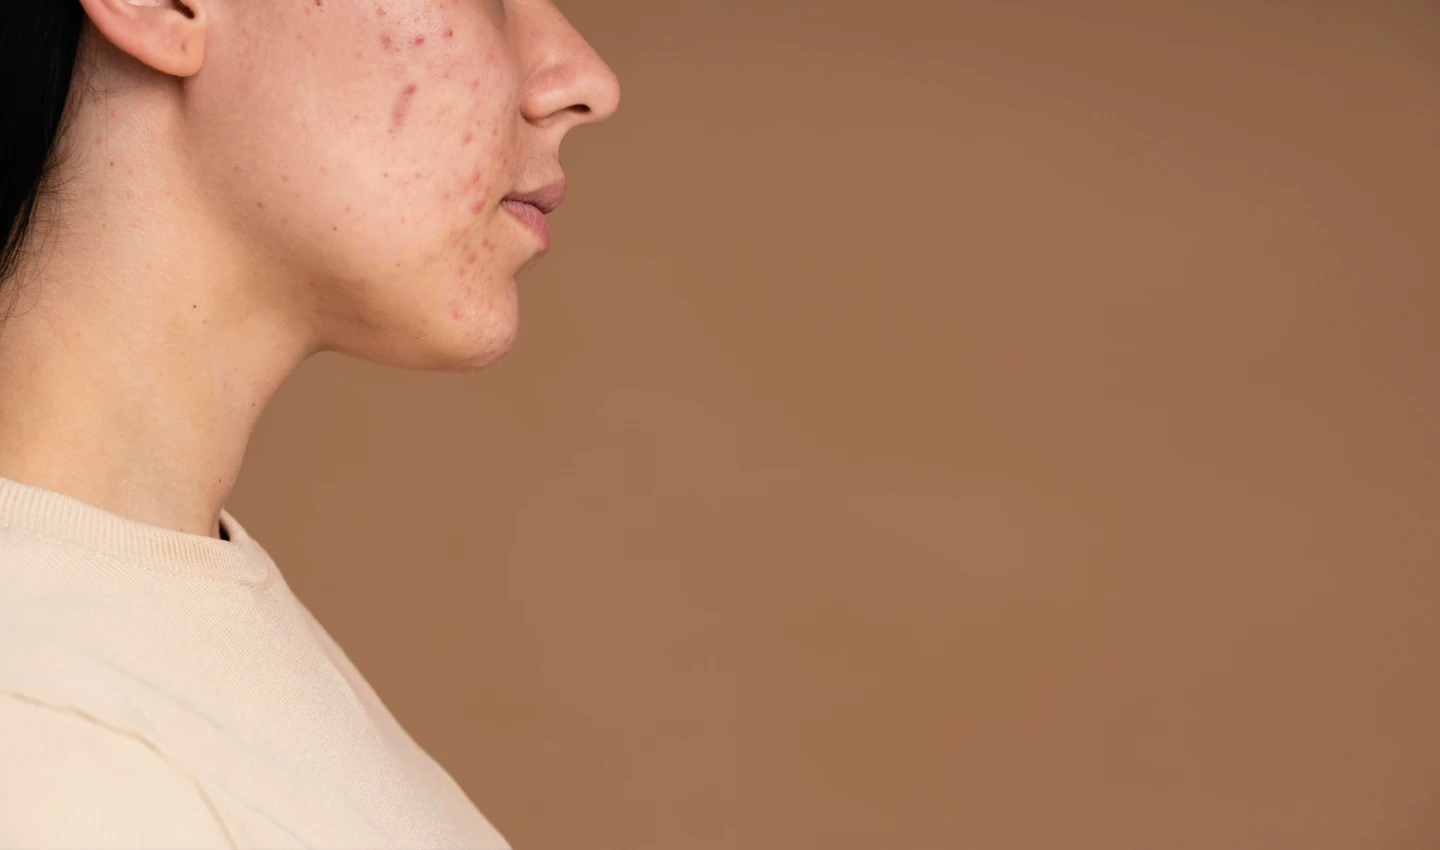 A girl's face with acne, highlighting the importance of a holistic approach to acne treatment.